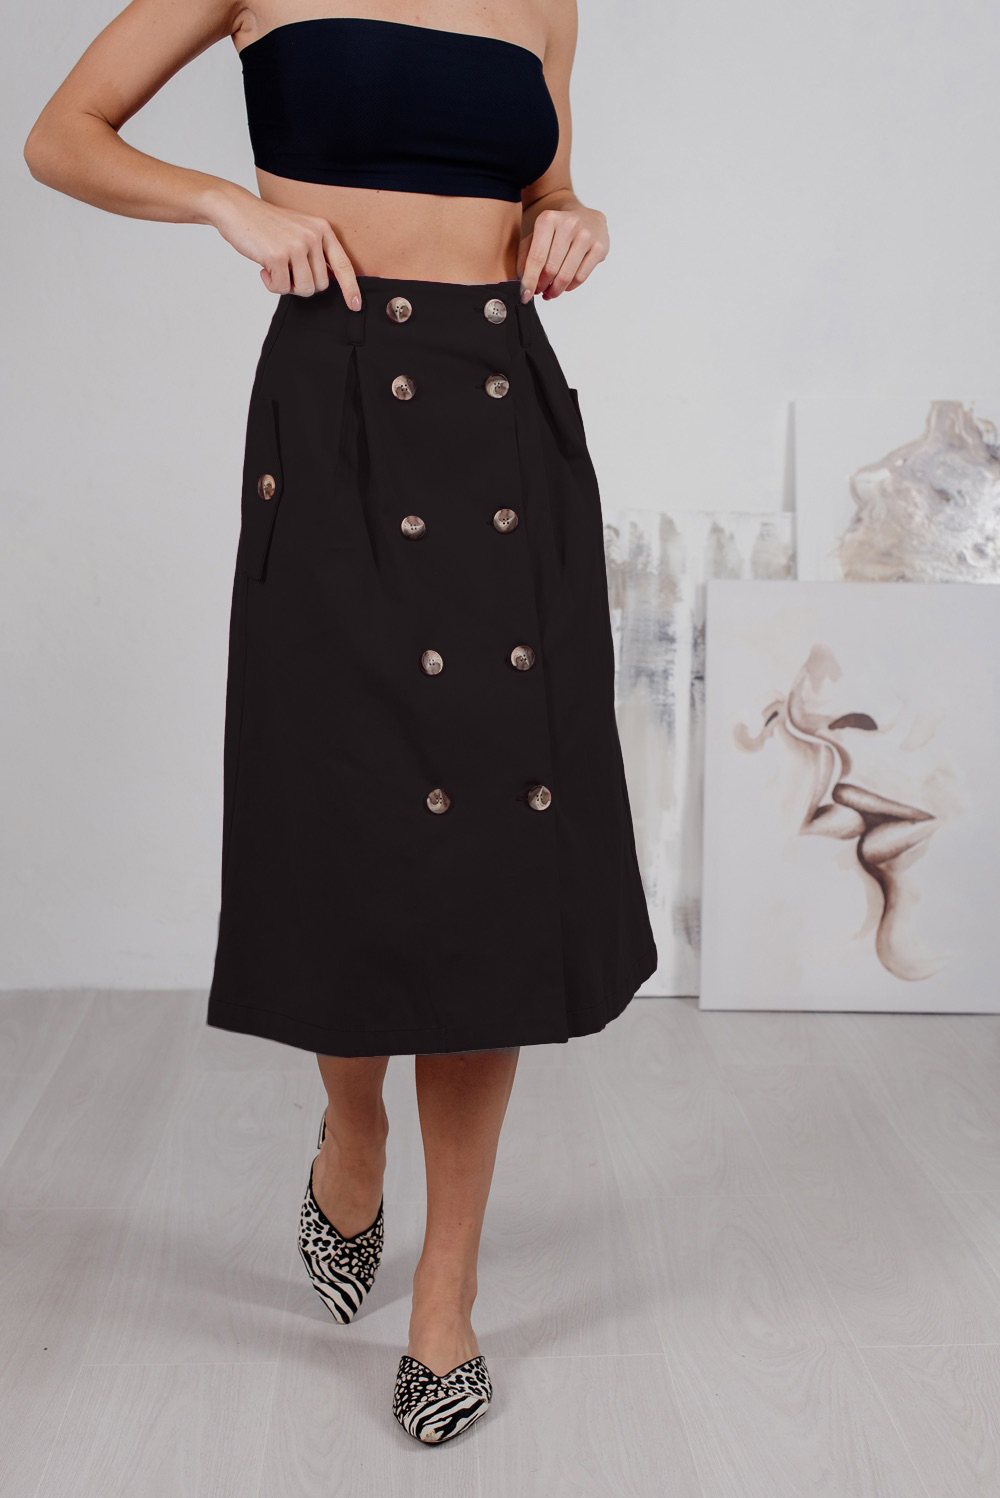 Black denim skirt with buttons and side pockets